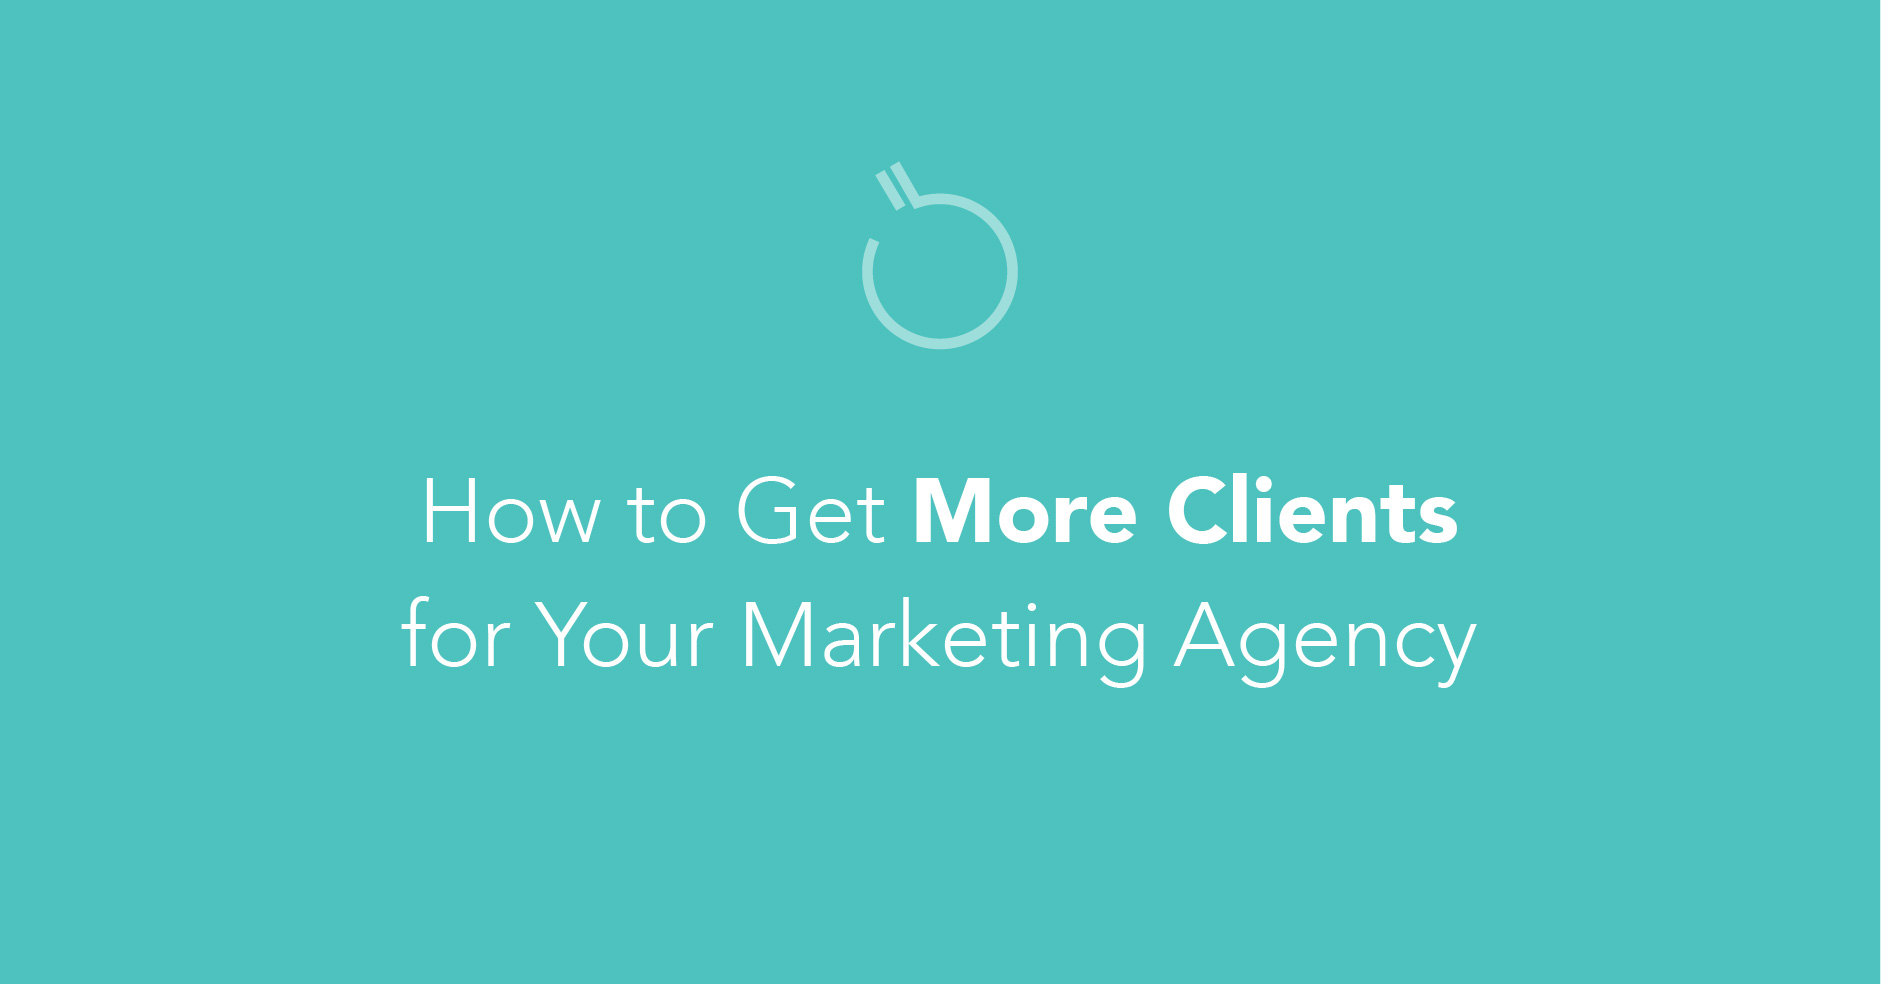 How to get more clients | BombBomb Video Email